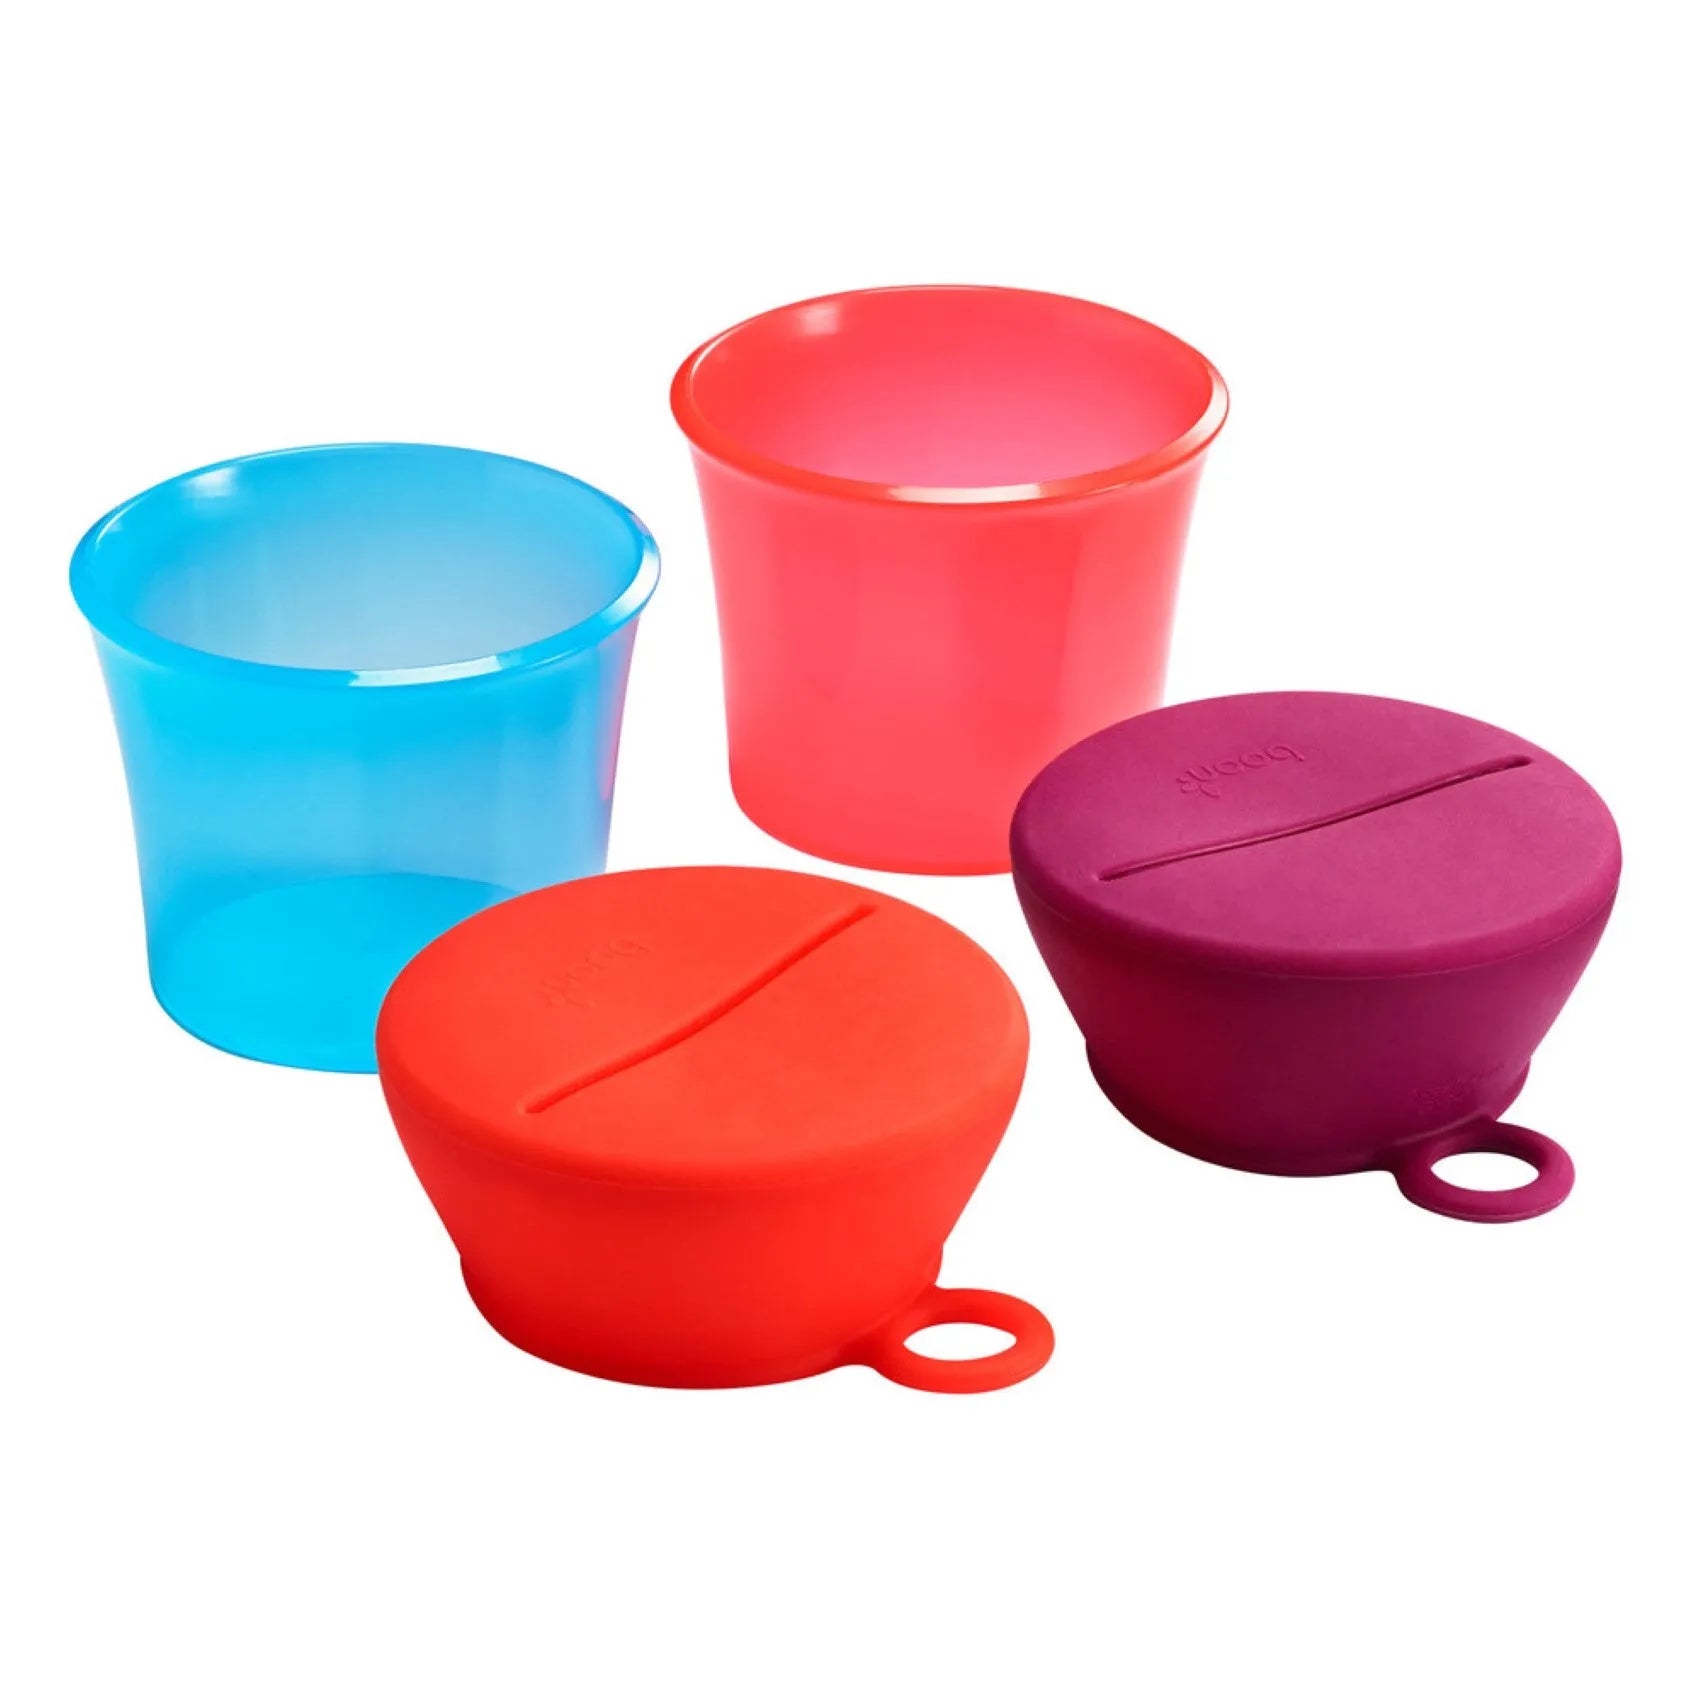 Boon - Snug Snack Containers With Stretchy Silicone Lids (Pink)